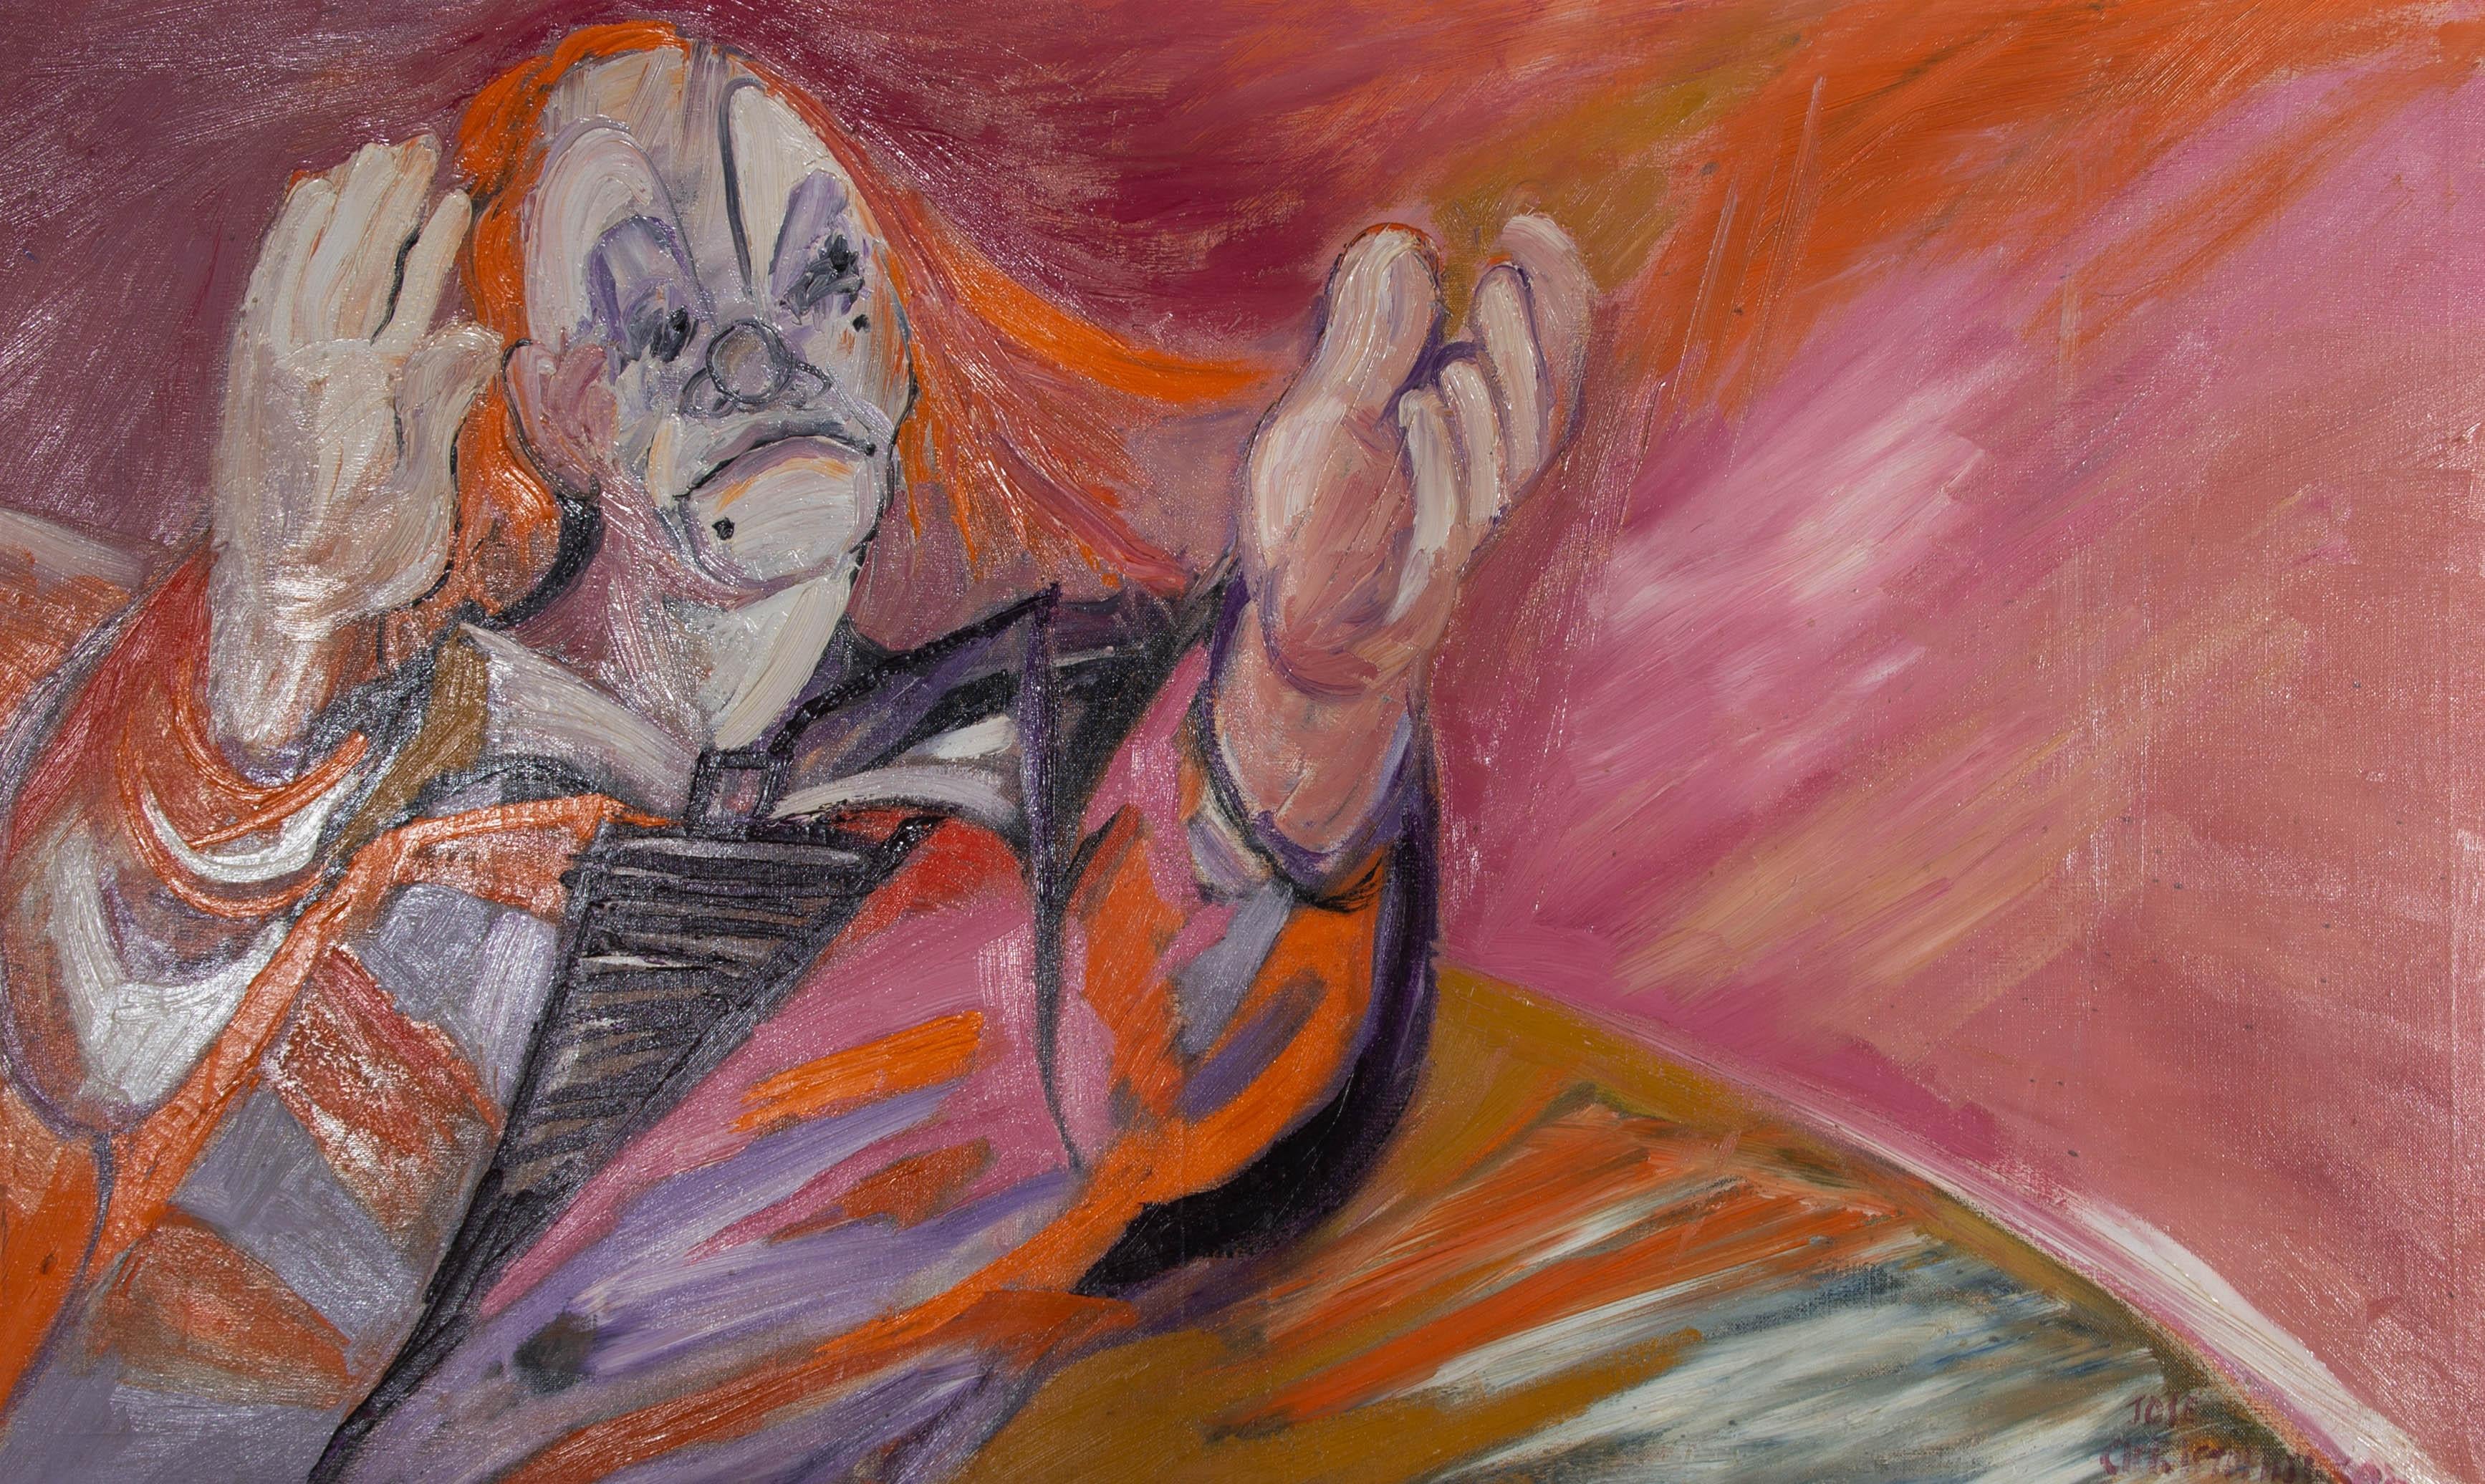 A strikingly vibrant and eye catching mid Century oil showing a miserable clown applauding. The artist has used an incredibly dynamic use of shocking colour and large gestural brushstrokes to create an image full of life and movement. The artist has